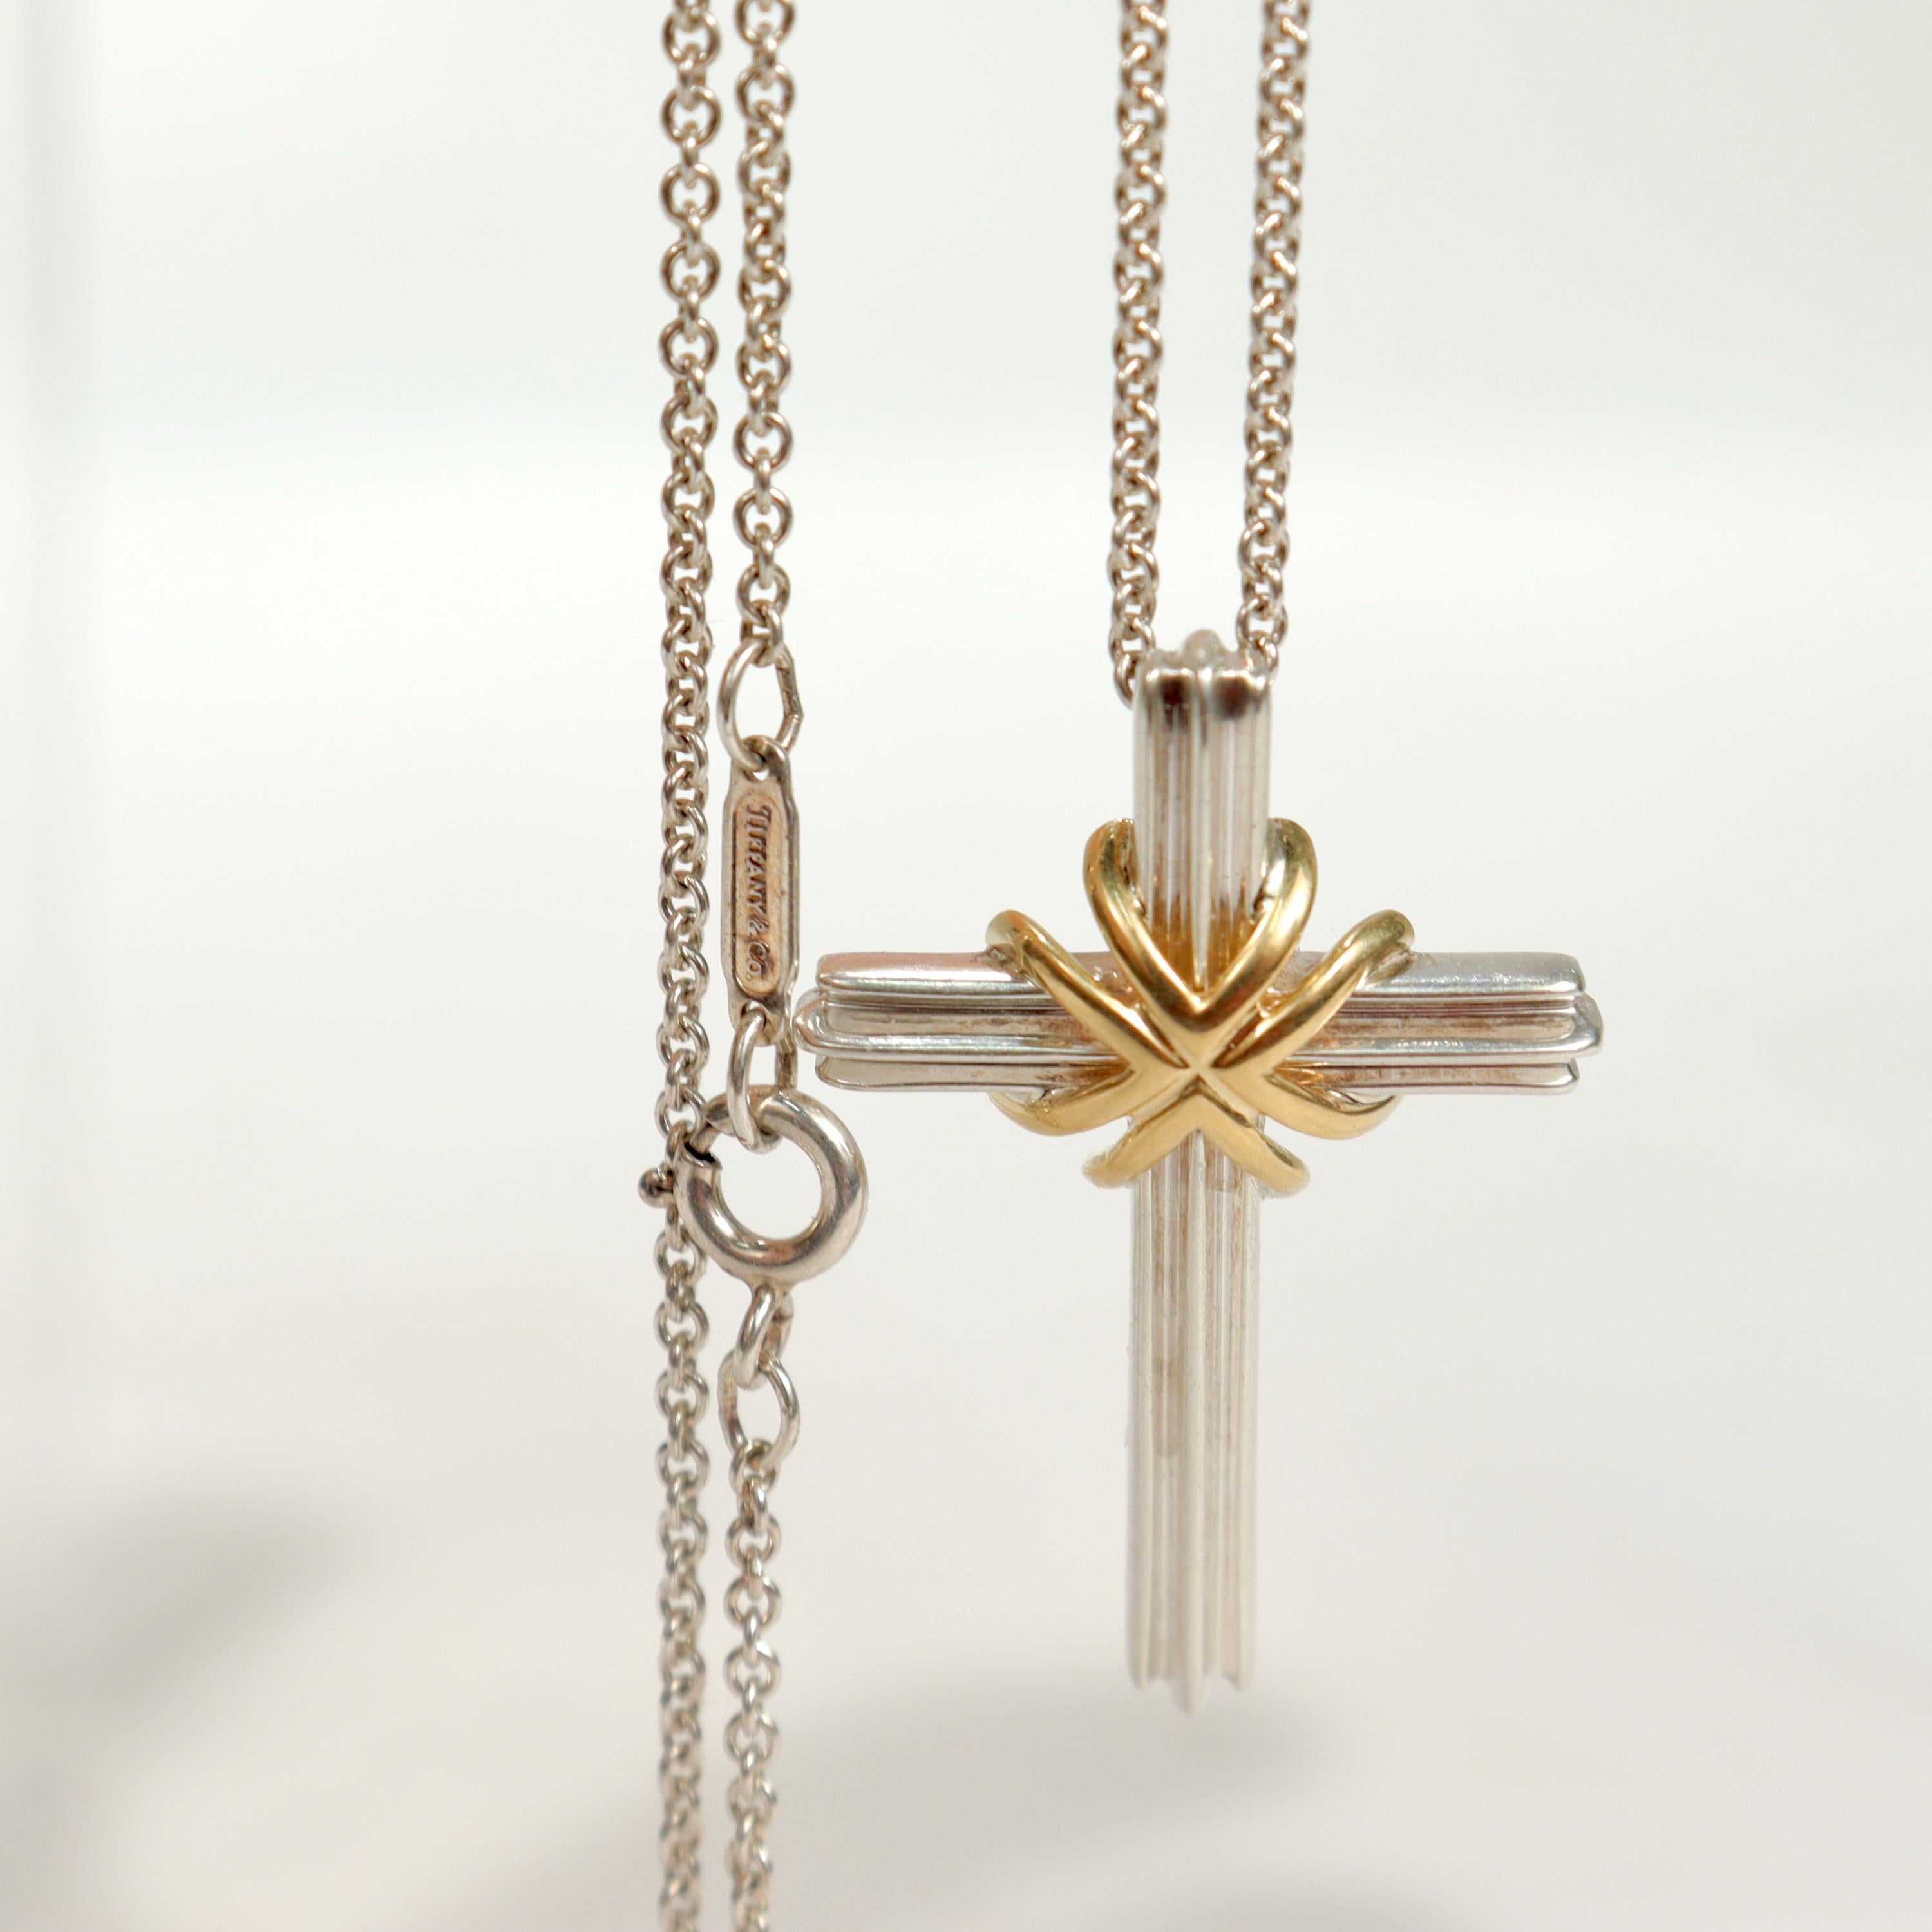 Tiffany & Co. 18K Gold & Sterling Silver Crucifix Cross Pendant & Necklace 4